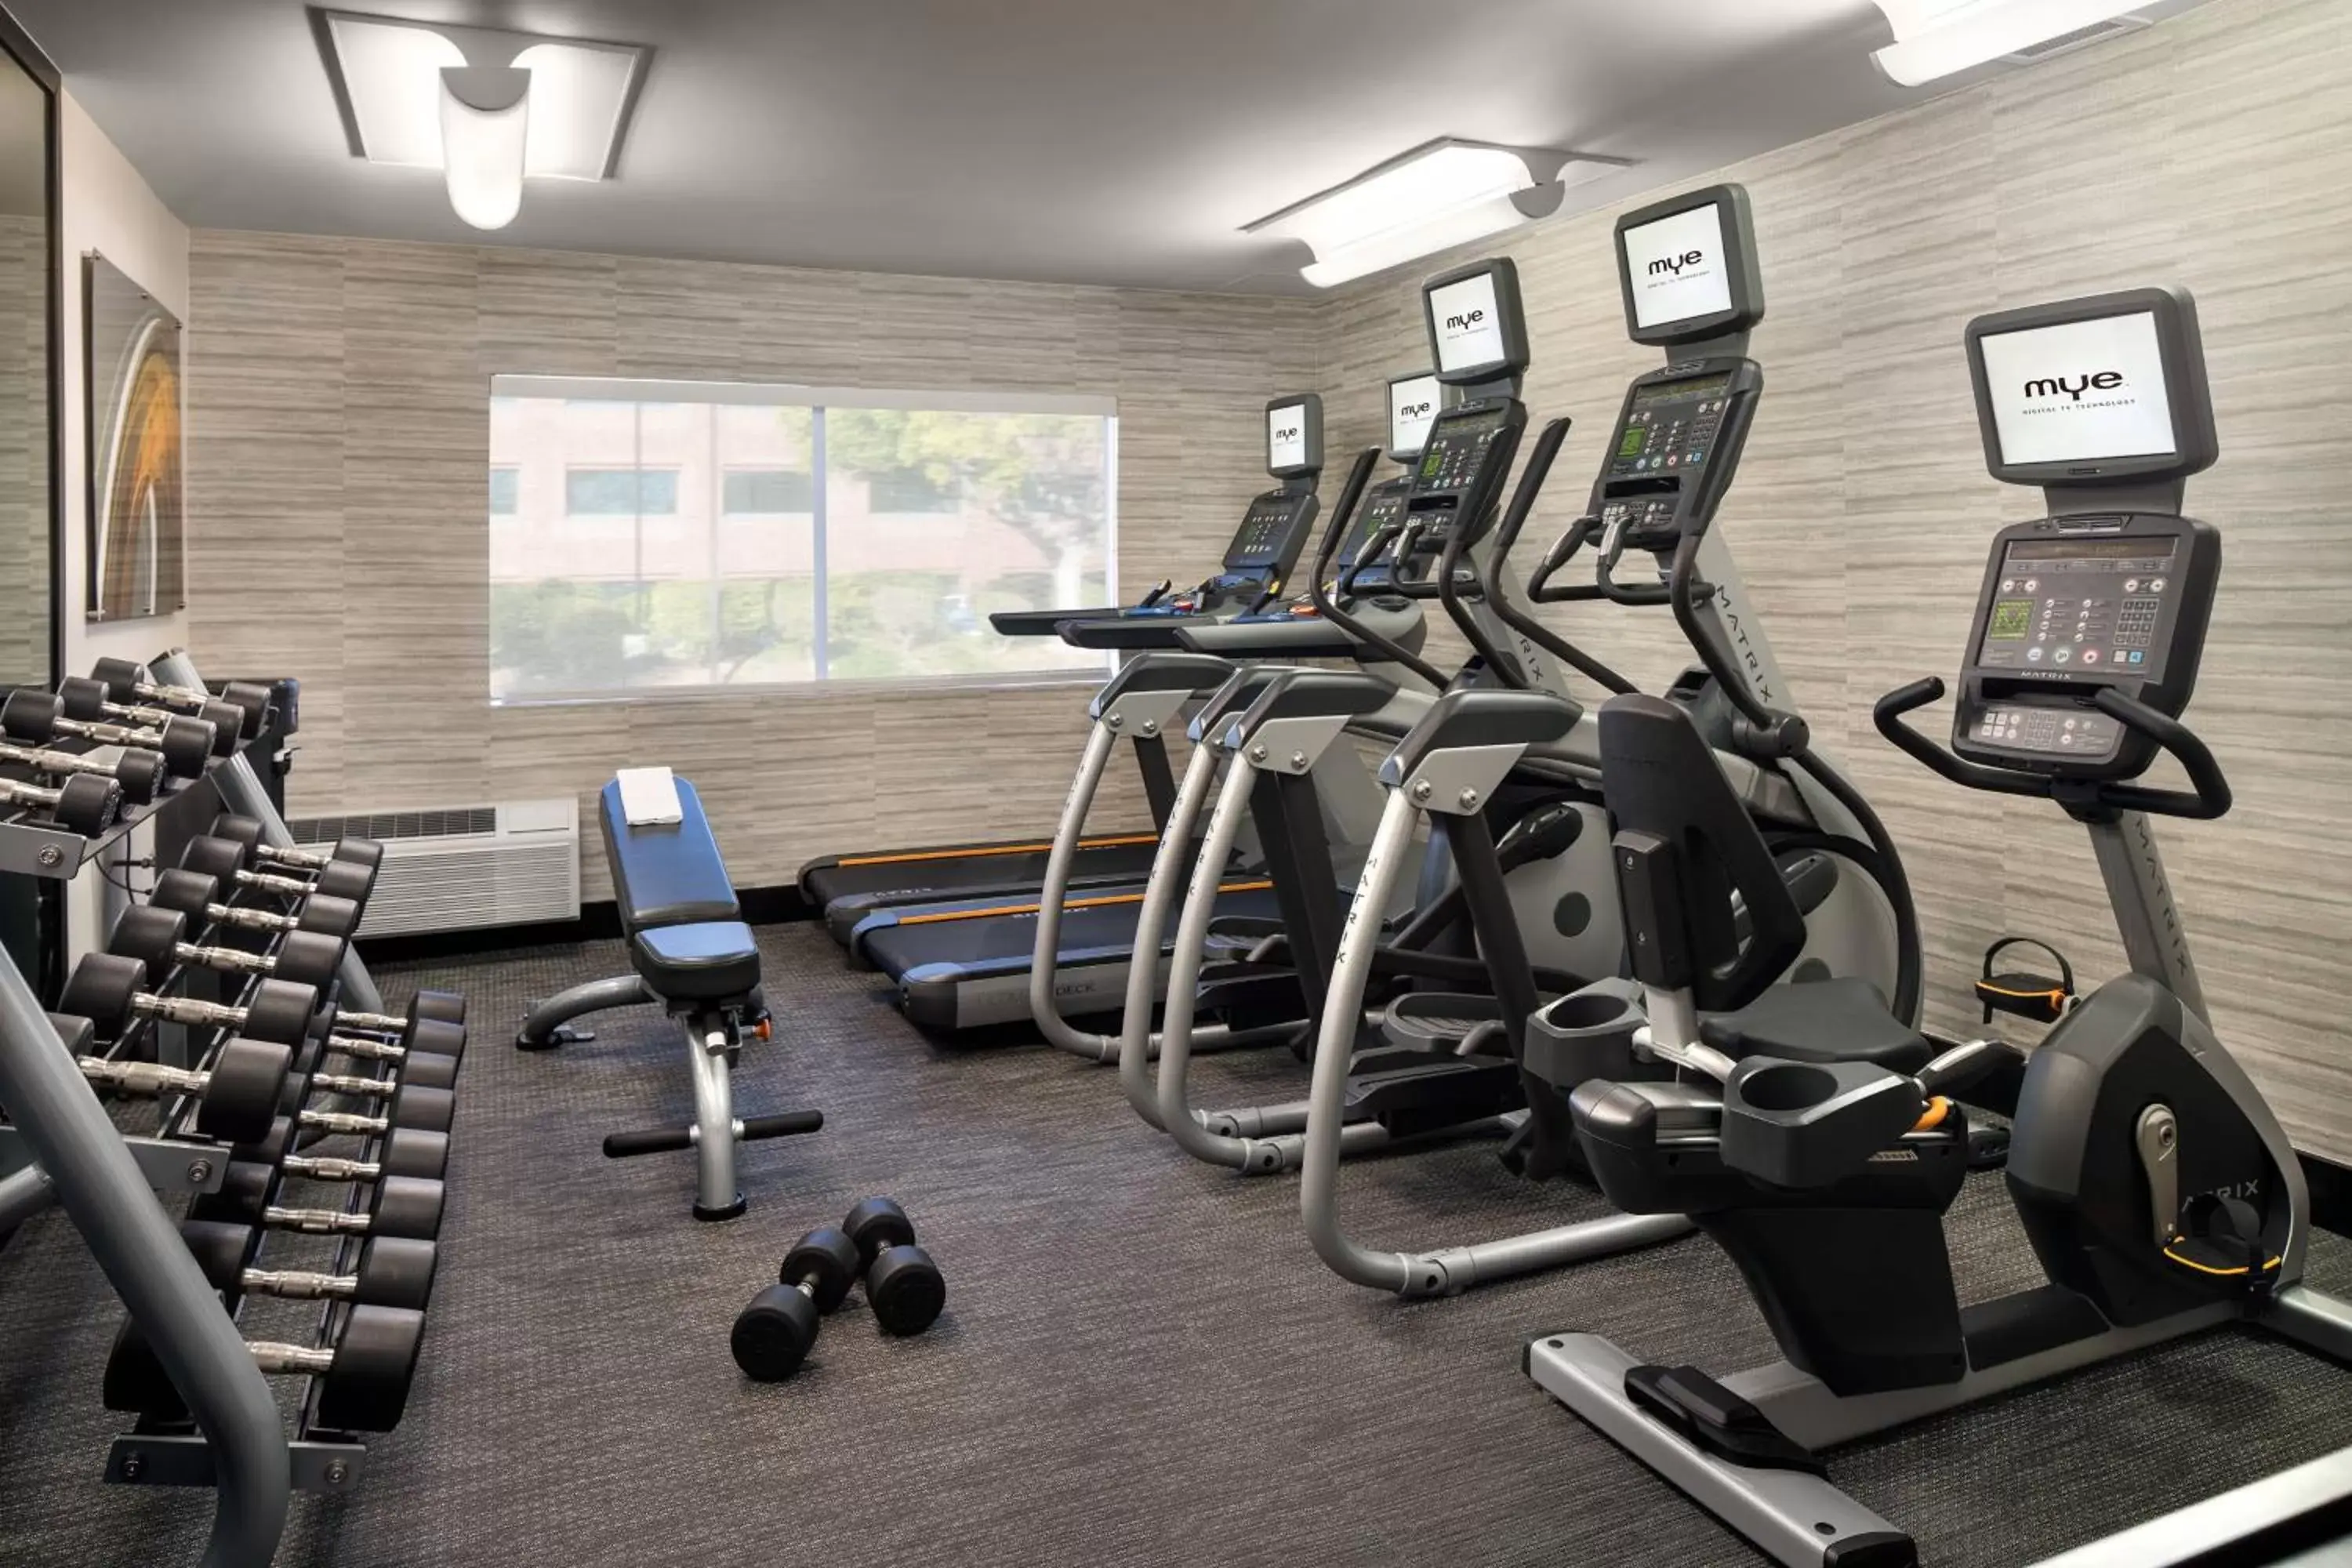 Fitness centre/facilities, Fitness Center/Facilities in Courtyard by Marriott San Diego Sorrento Valley